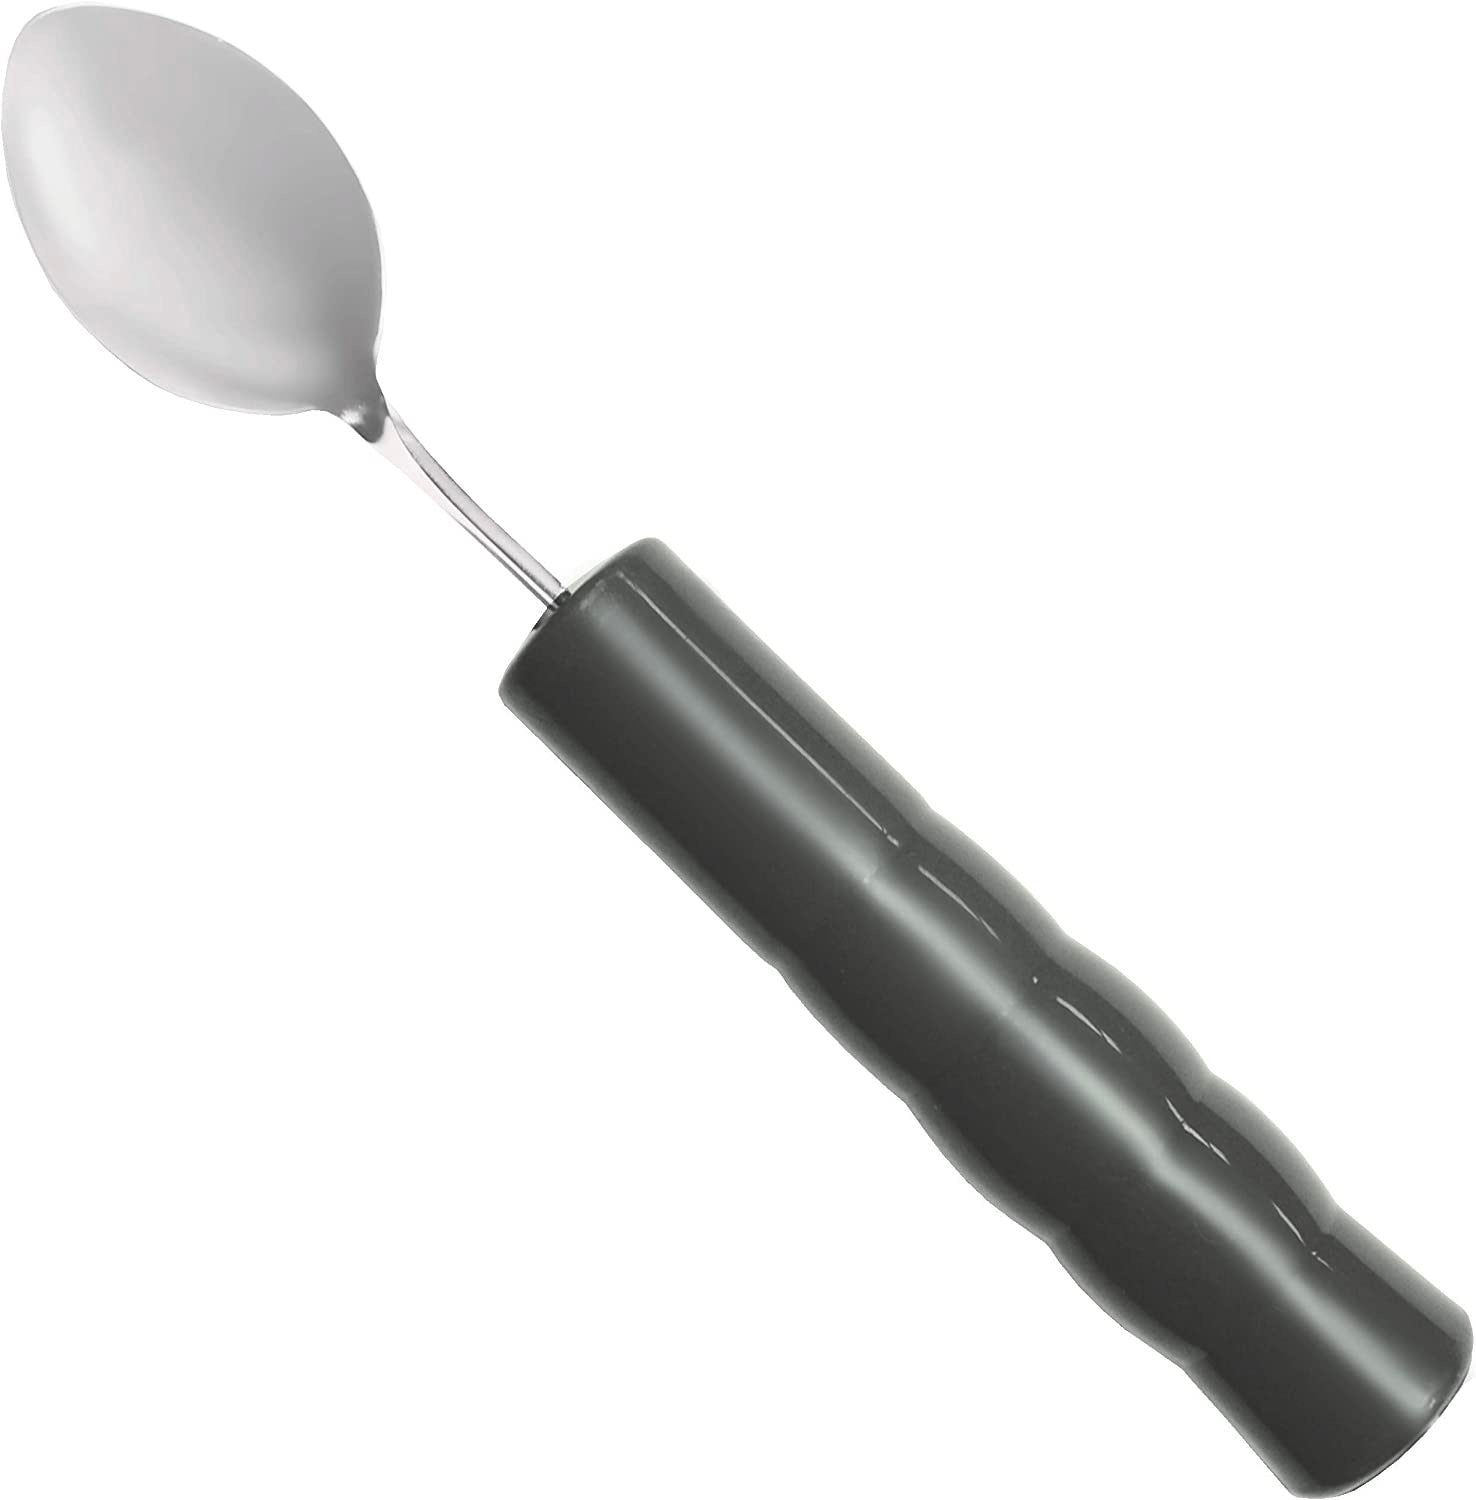 Weighted Spoon